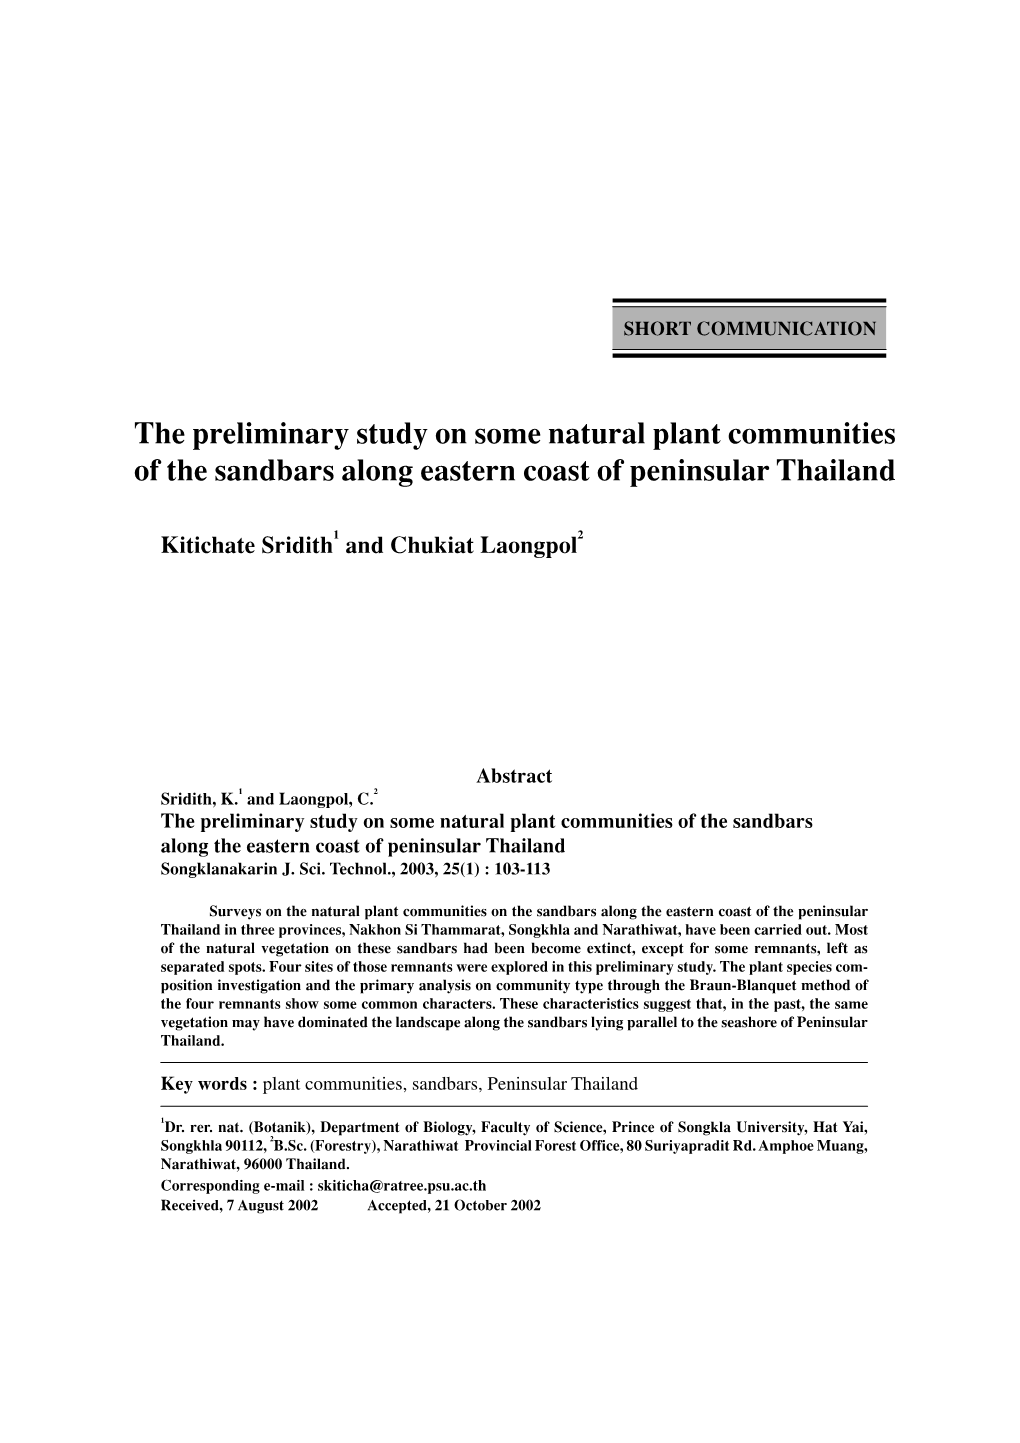 The Preliminary Study on Some Natural Plant Communities of the Sandbars Along Eastern Coast of Peninsular Thailand